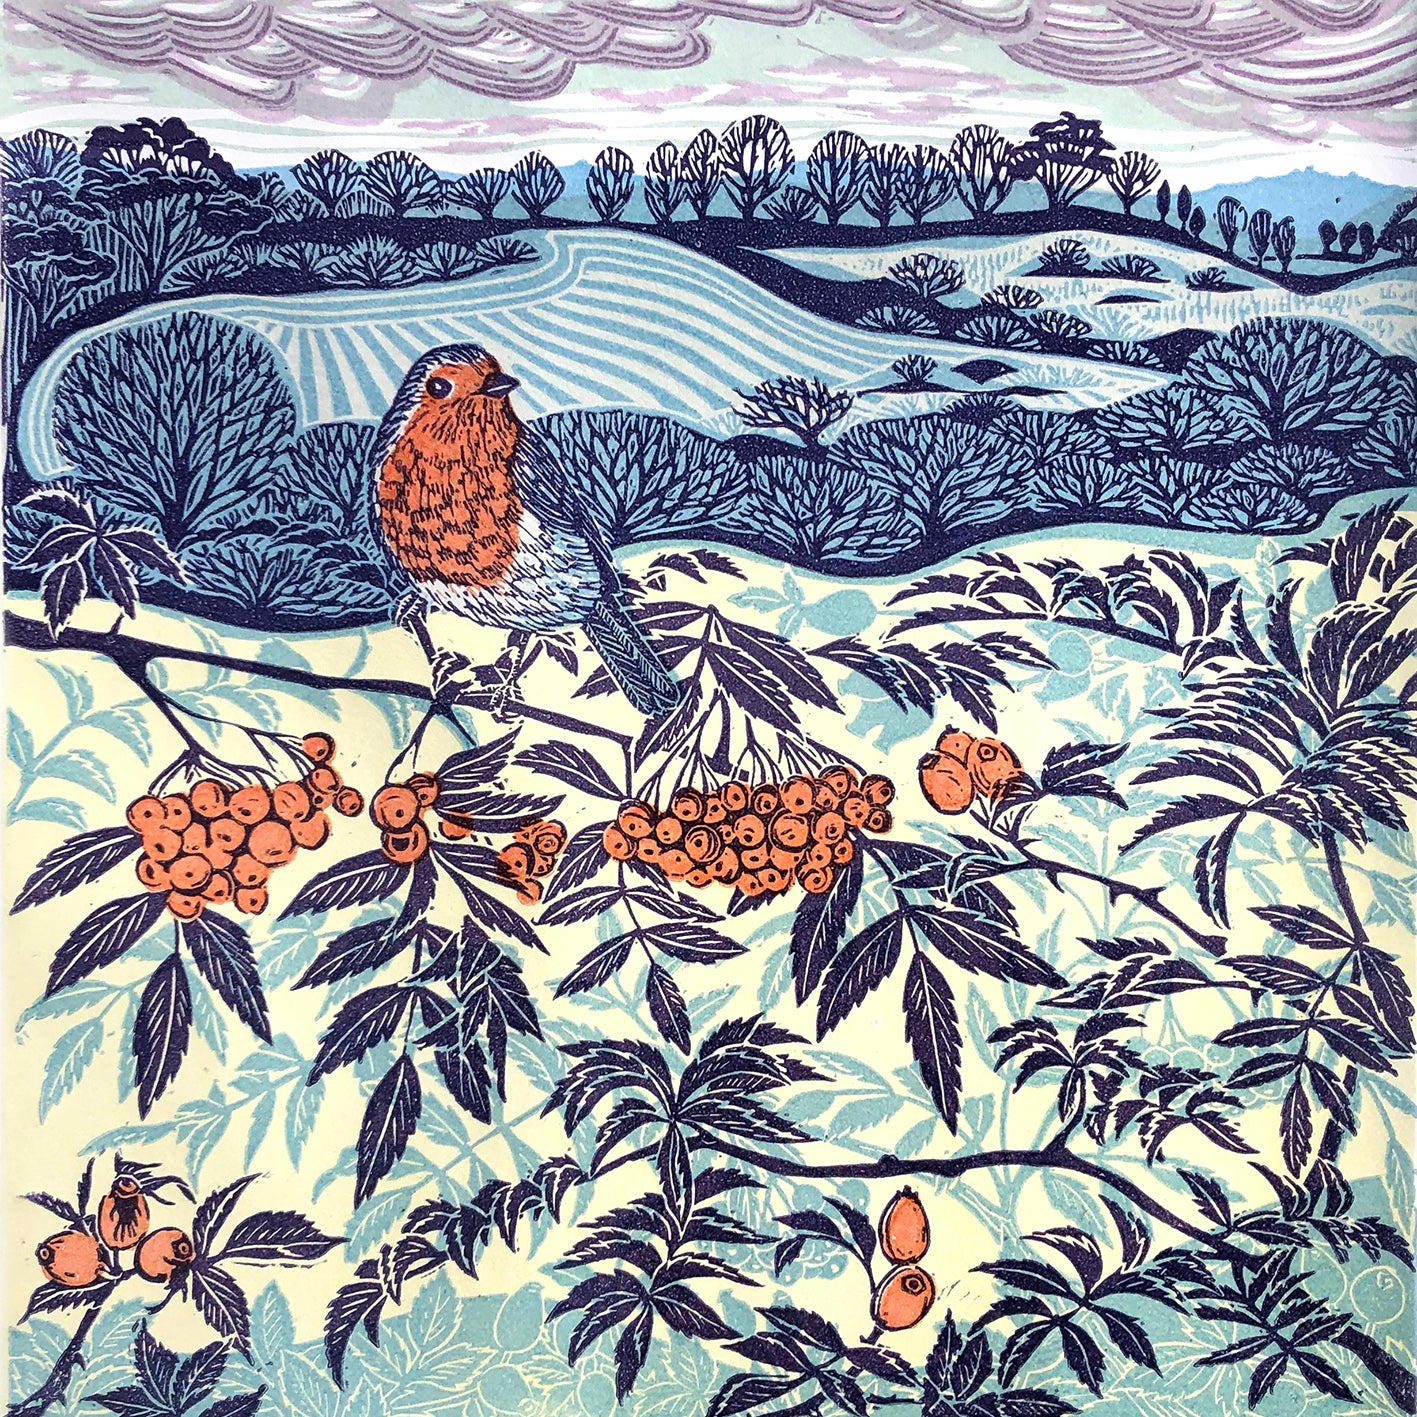 Journey into Wild Beauty: The Artistic Process of Claire Armitage's Lino Prints